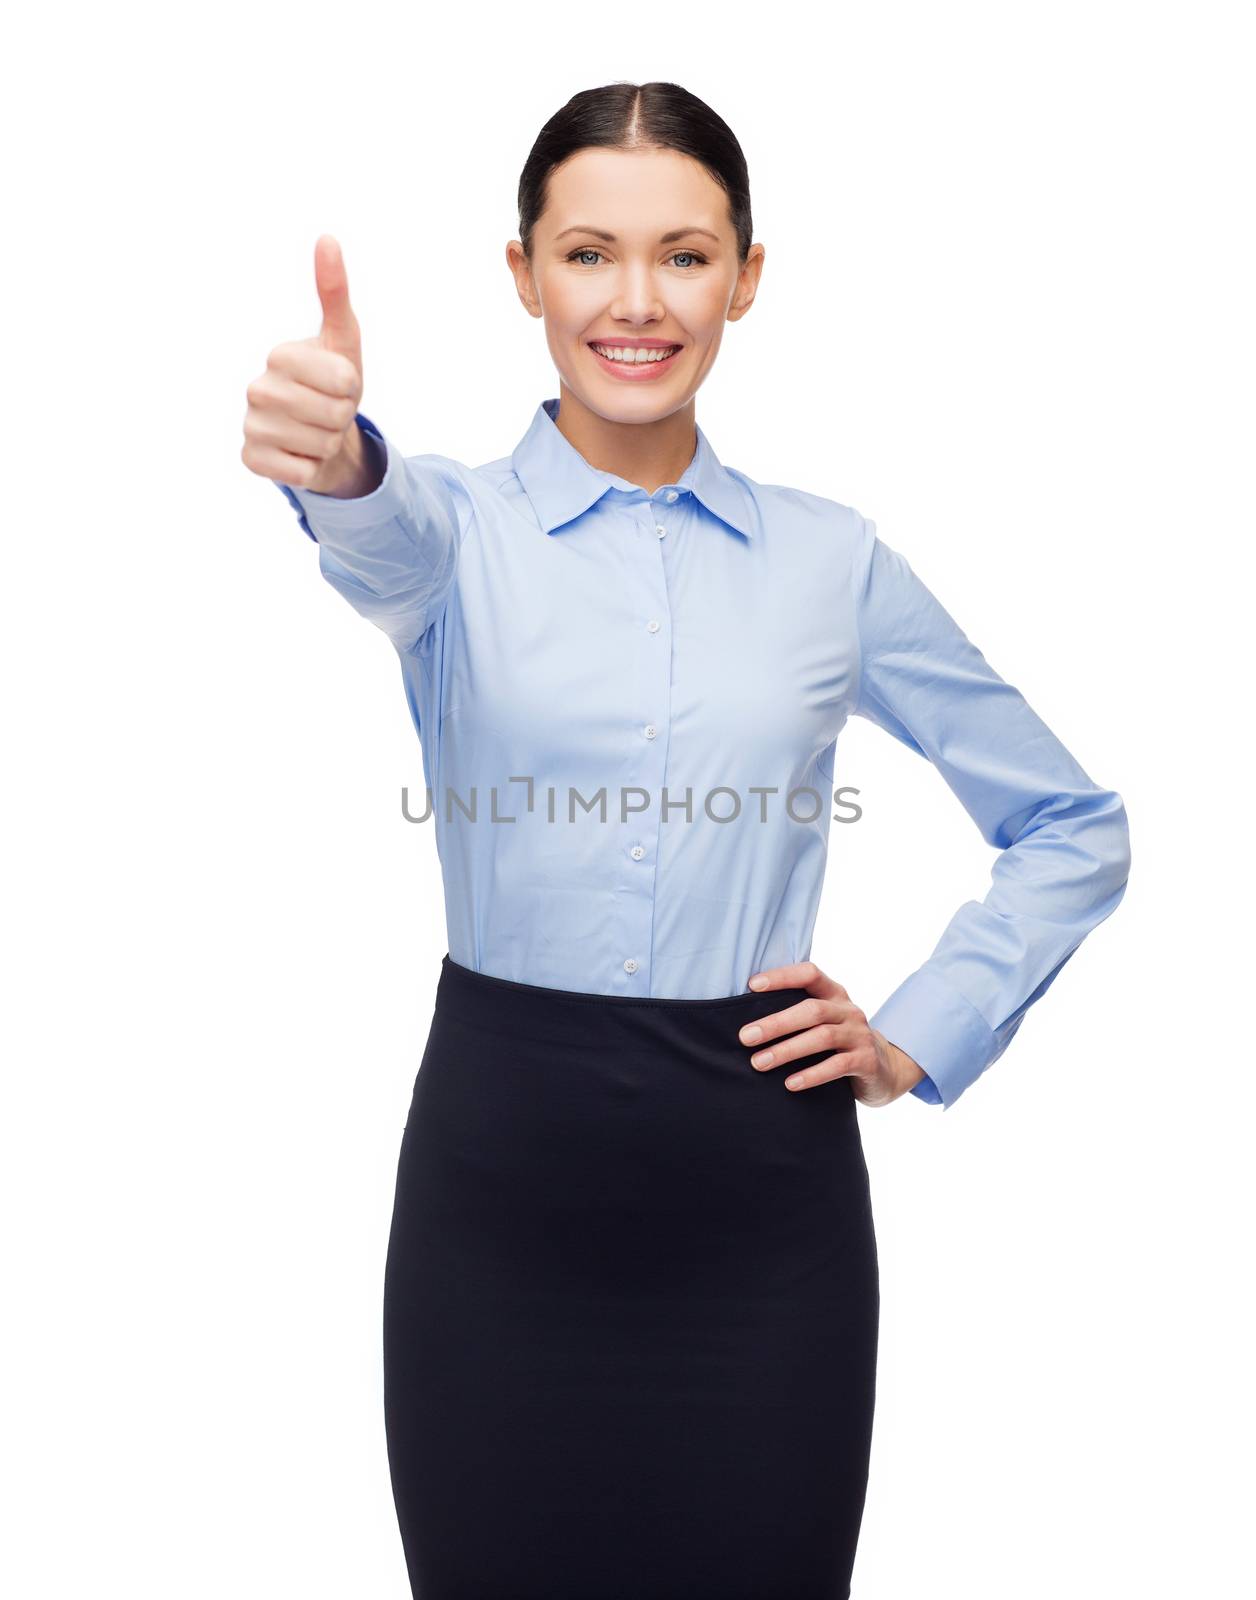 business and education concept - friendly young smiling businesswoman showing thumbs up